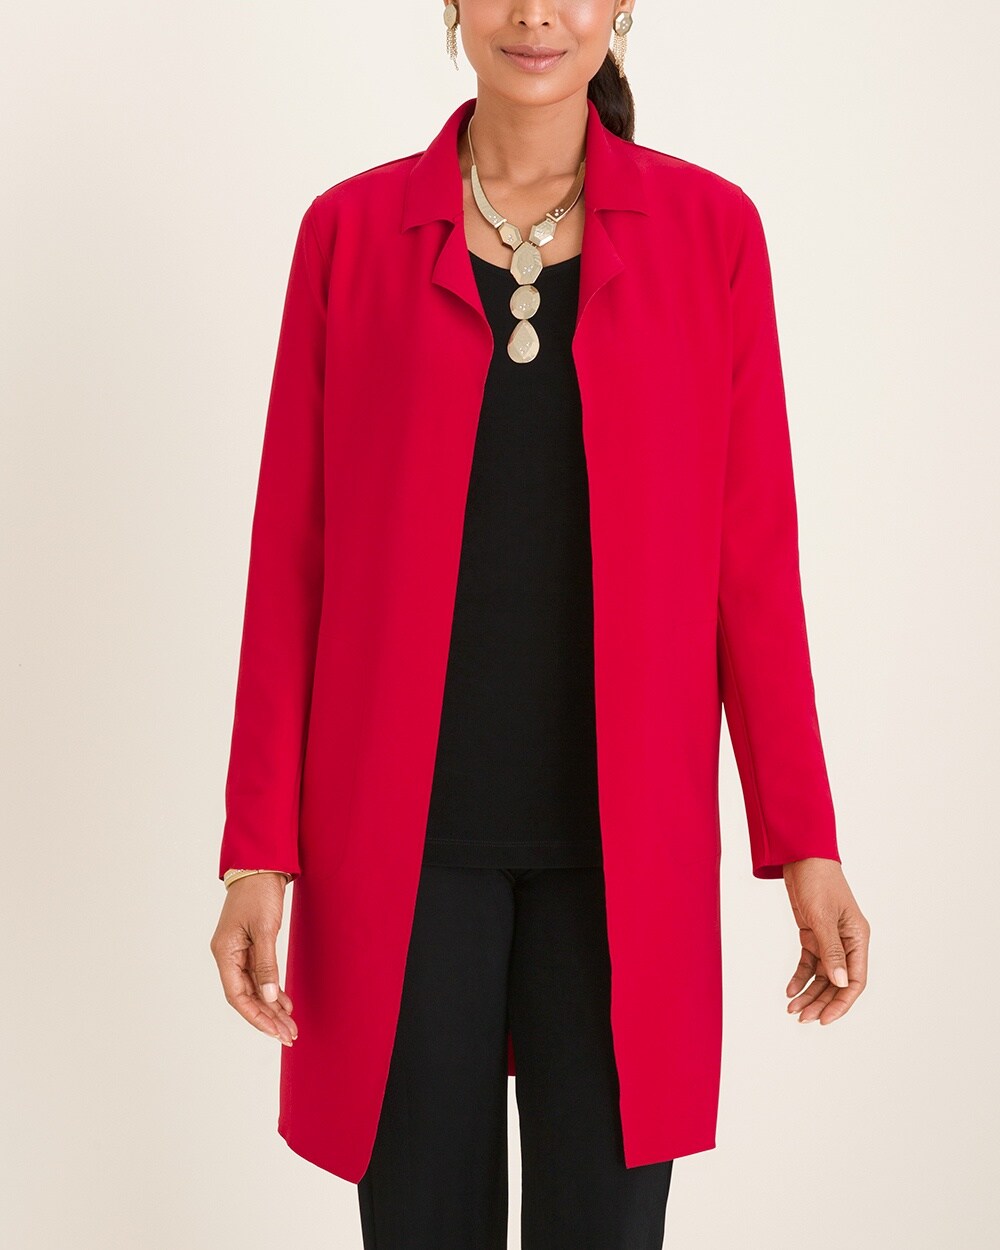 Travelers Collection Red Double-Faced Jacket